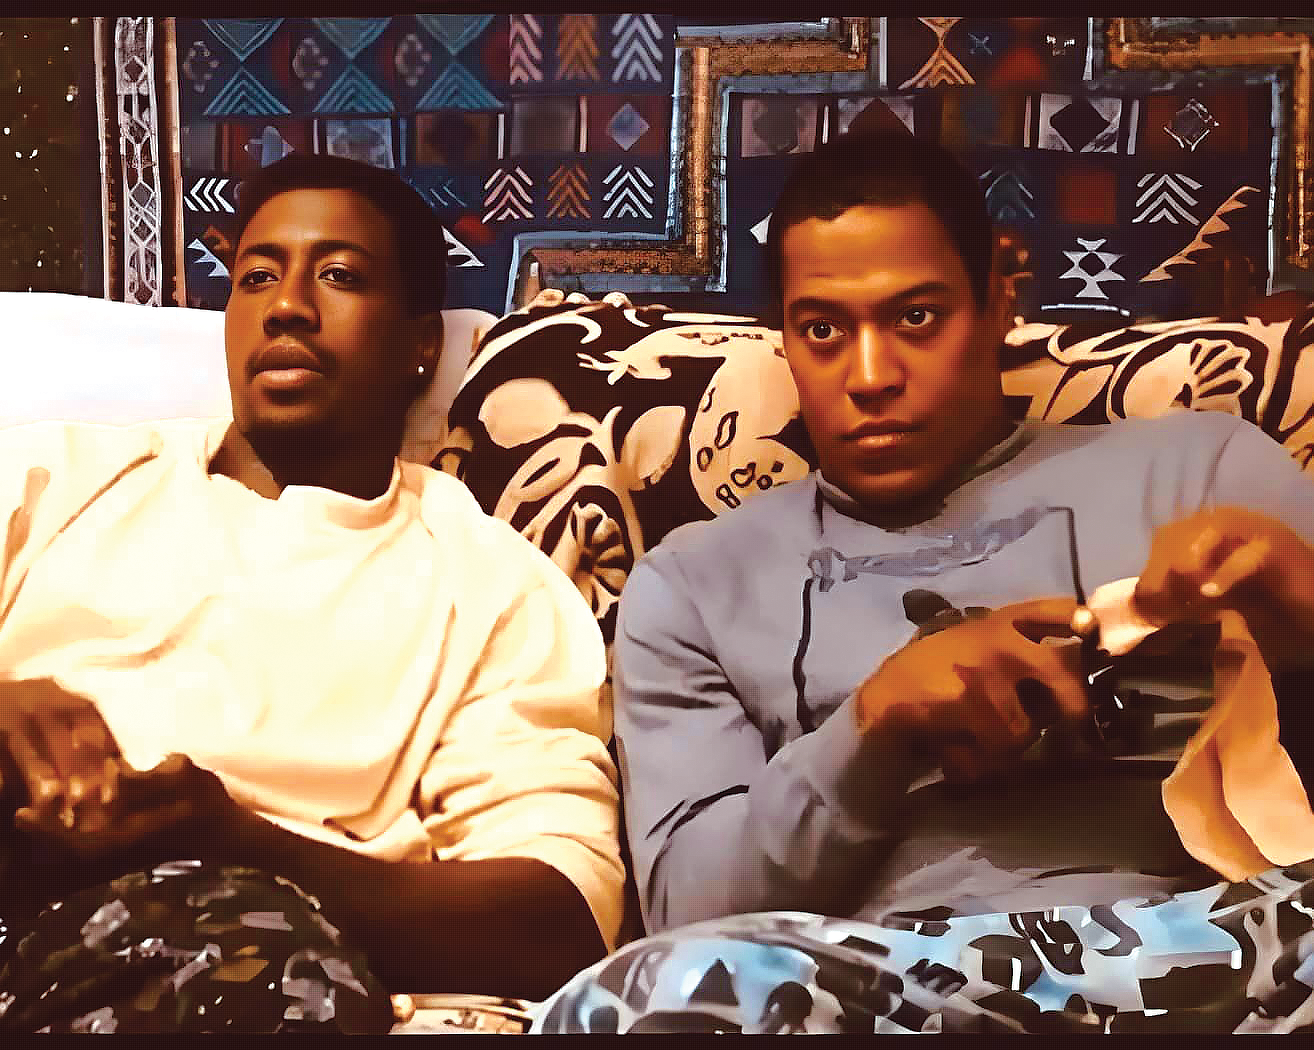 Wesley Snipes (left) with Cylk Cozart (right) in 'White Men Can't Jump'